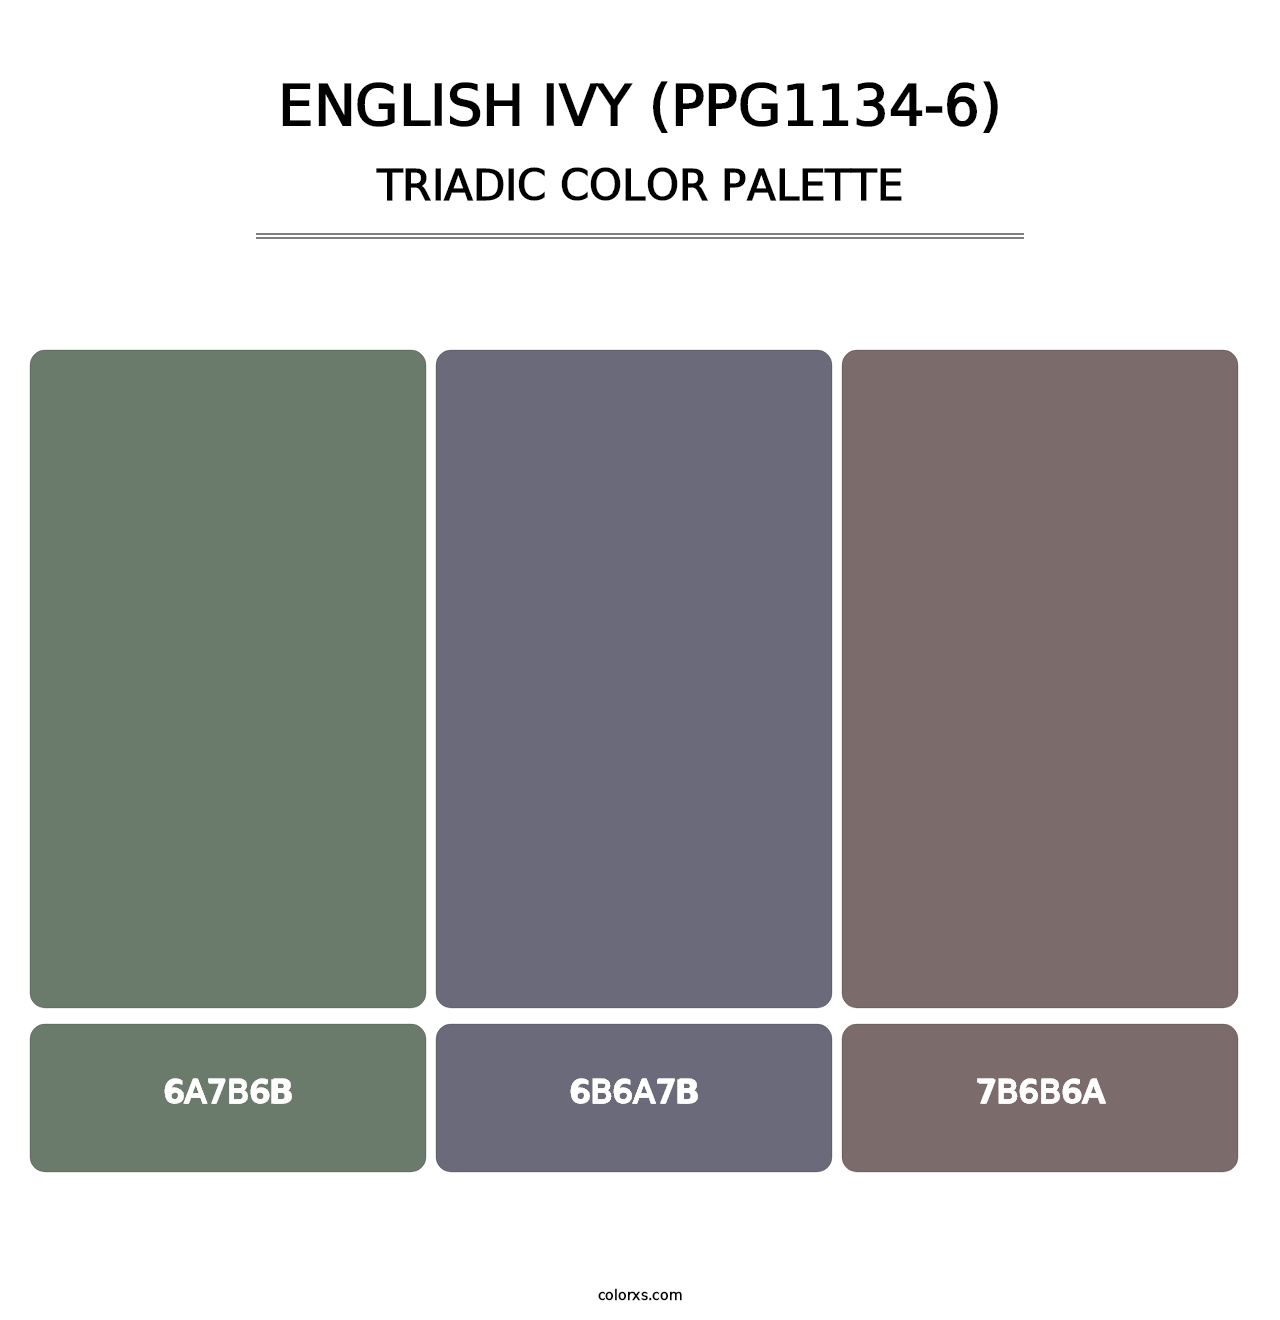 English Ivy (PPG1134-6) - Triadic Color Palette